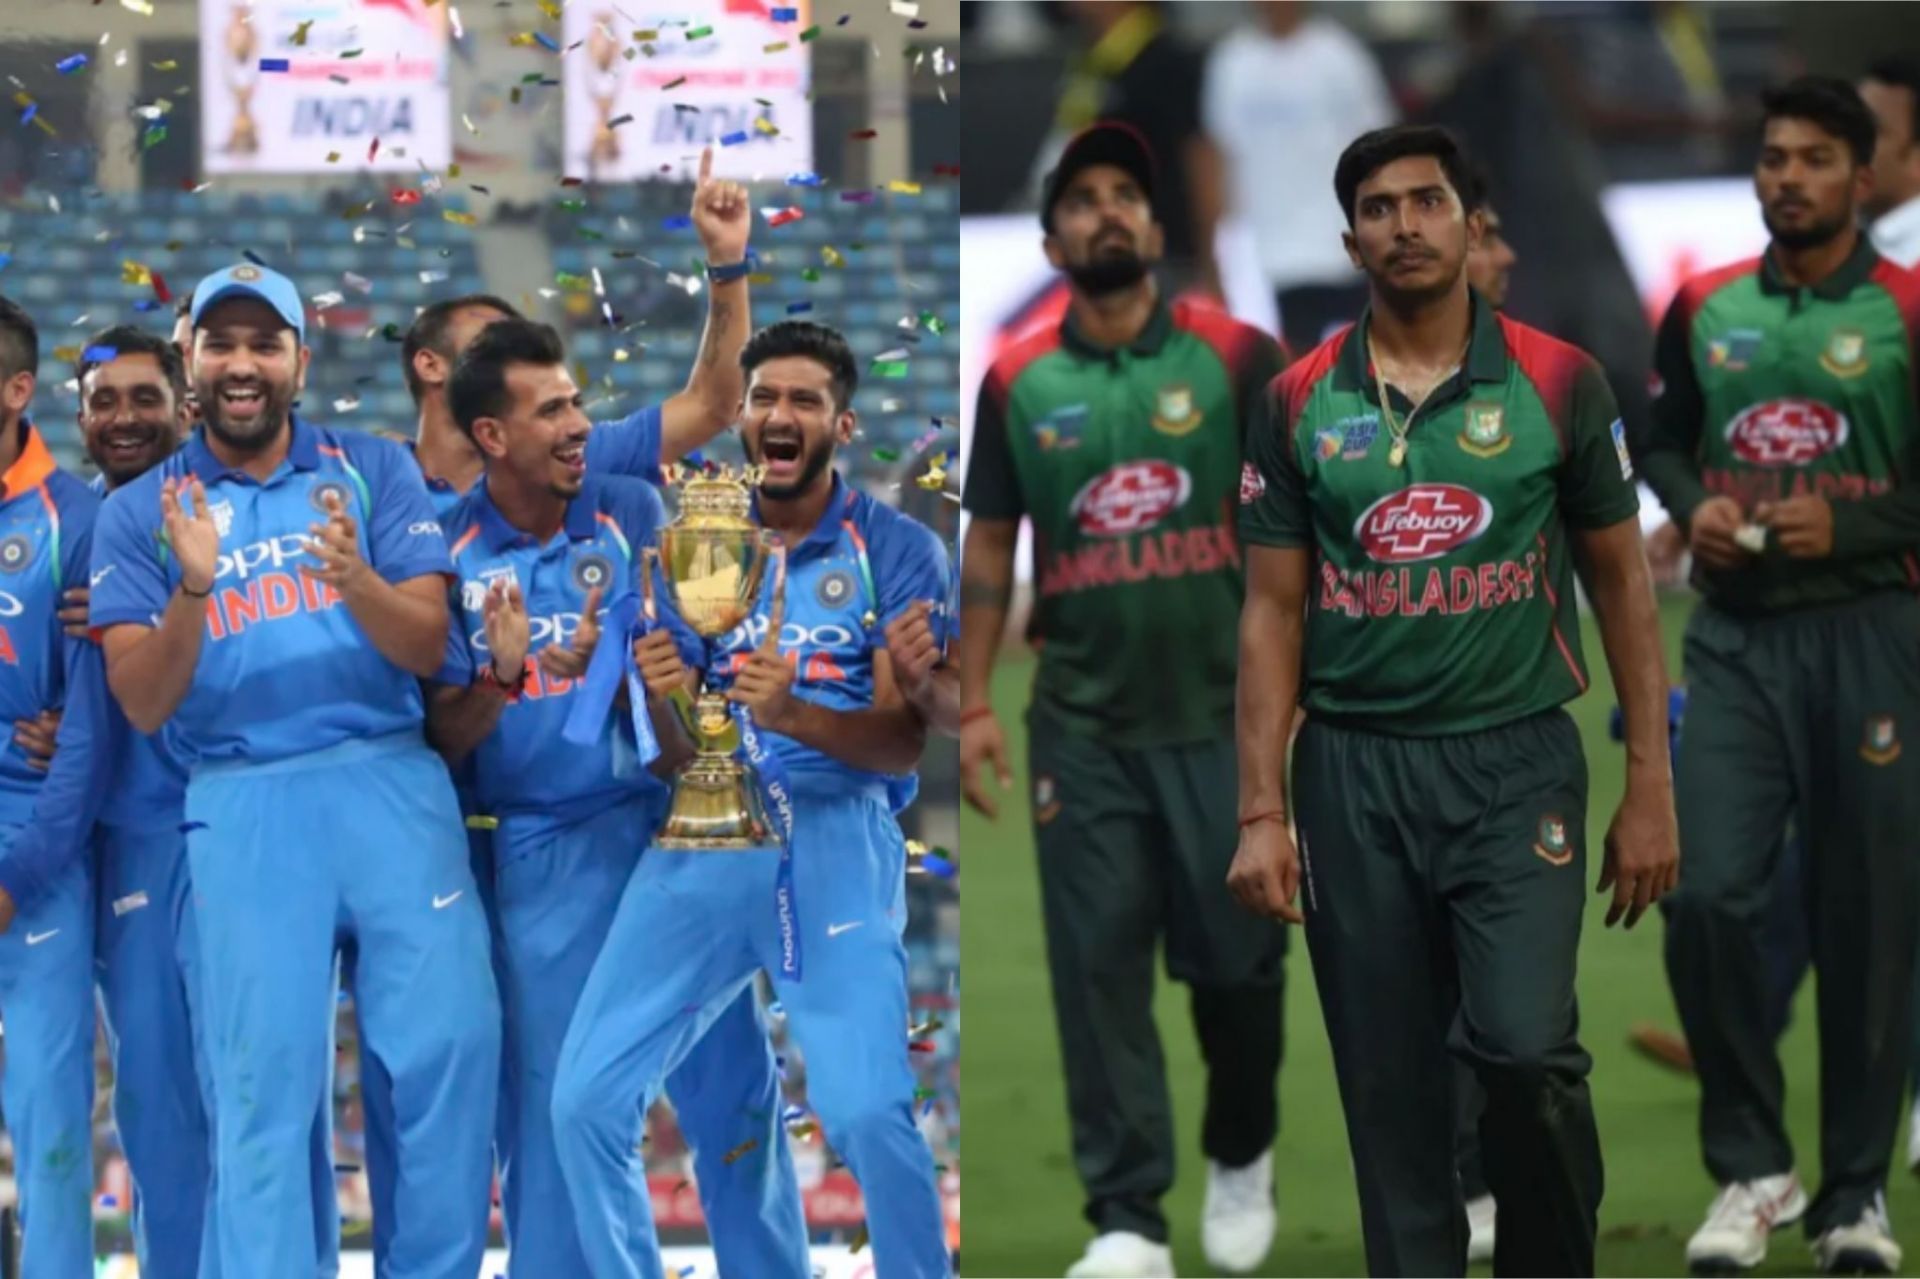 India and Bangladesh met in 2018 for their last Asia Cup match against each other [Getty Images]